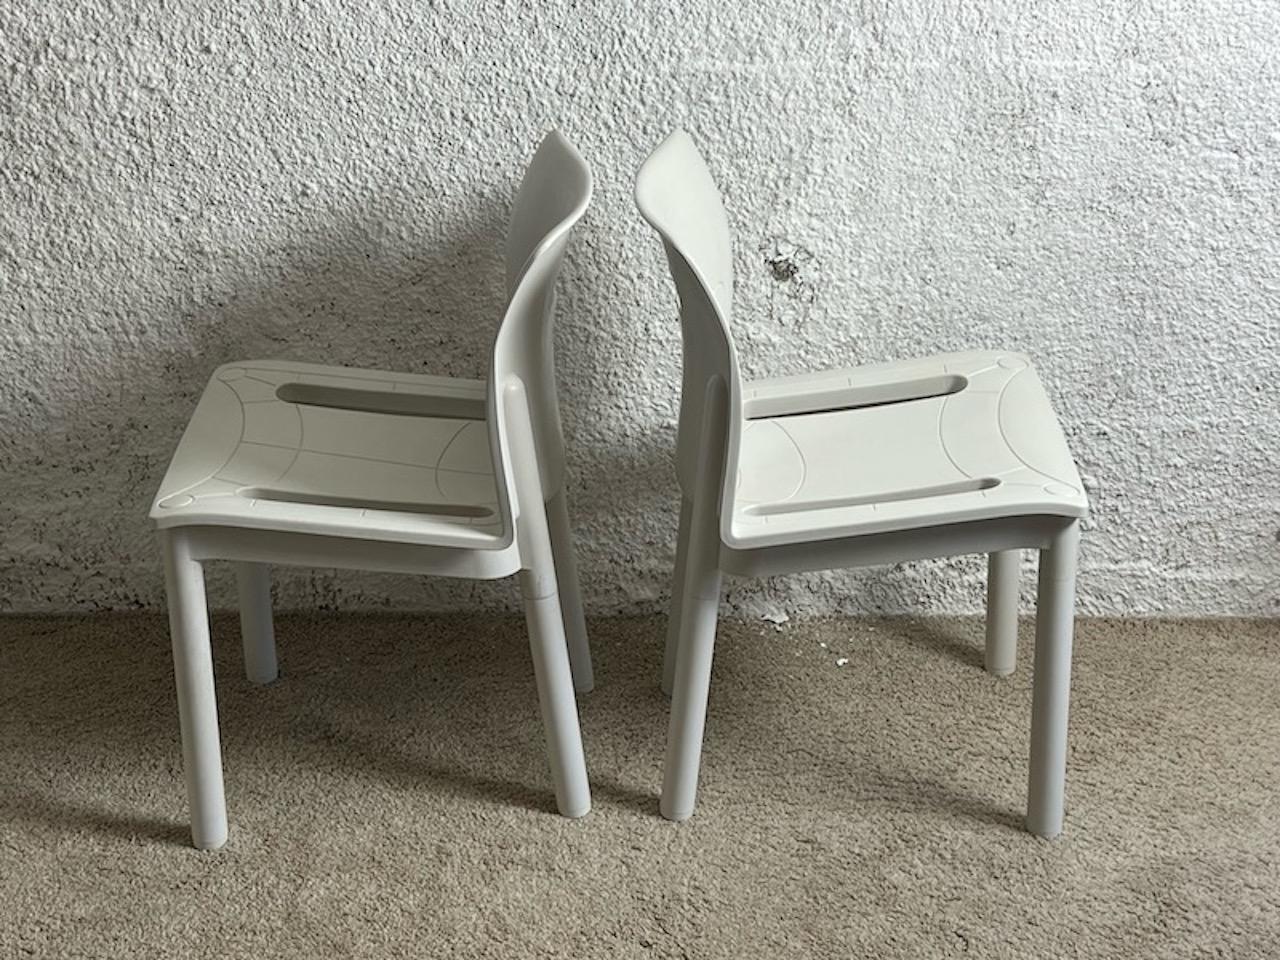 Kartell 4870 Anna Castelli  Award-Winning Stackable Chairs, 1980s For Sale 2